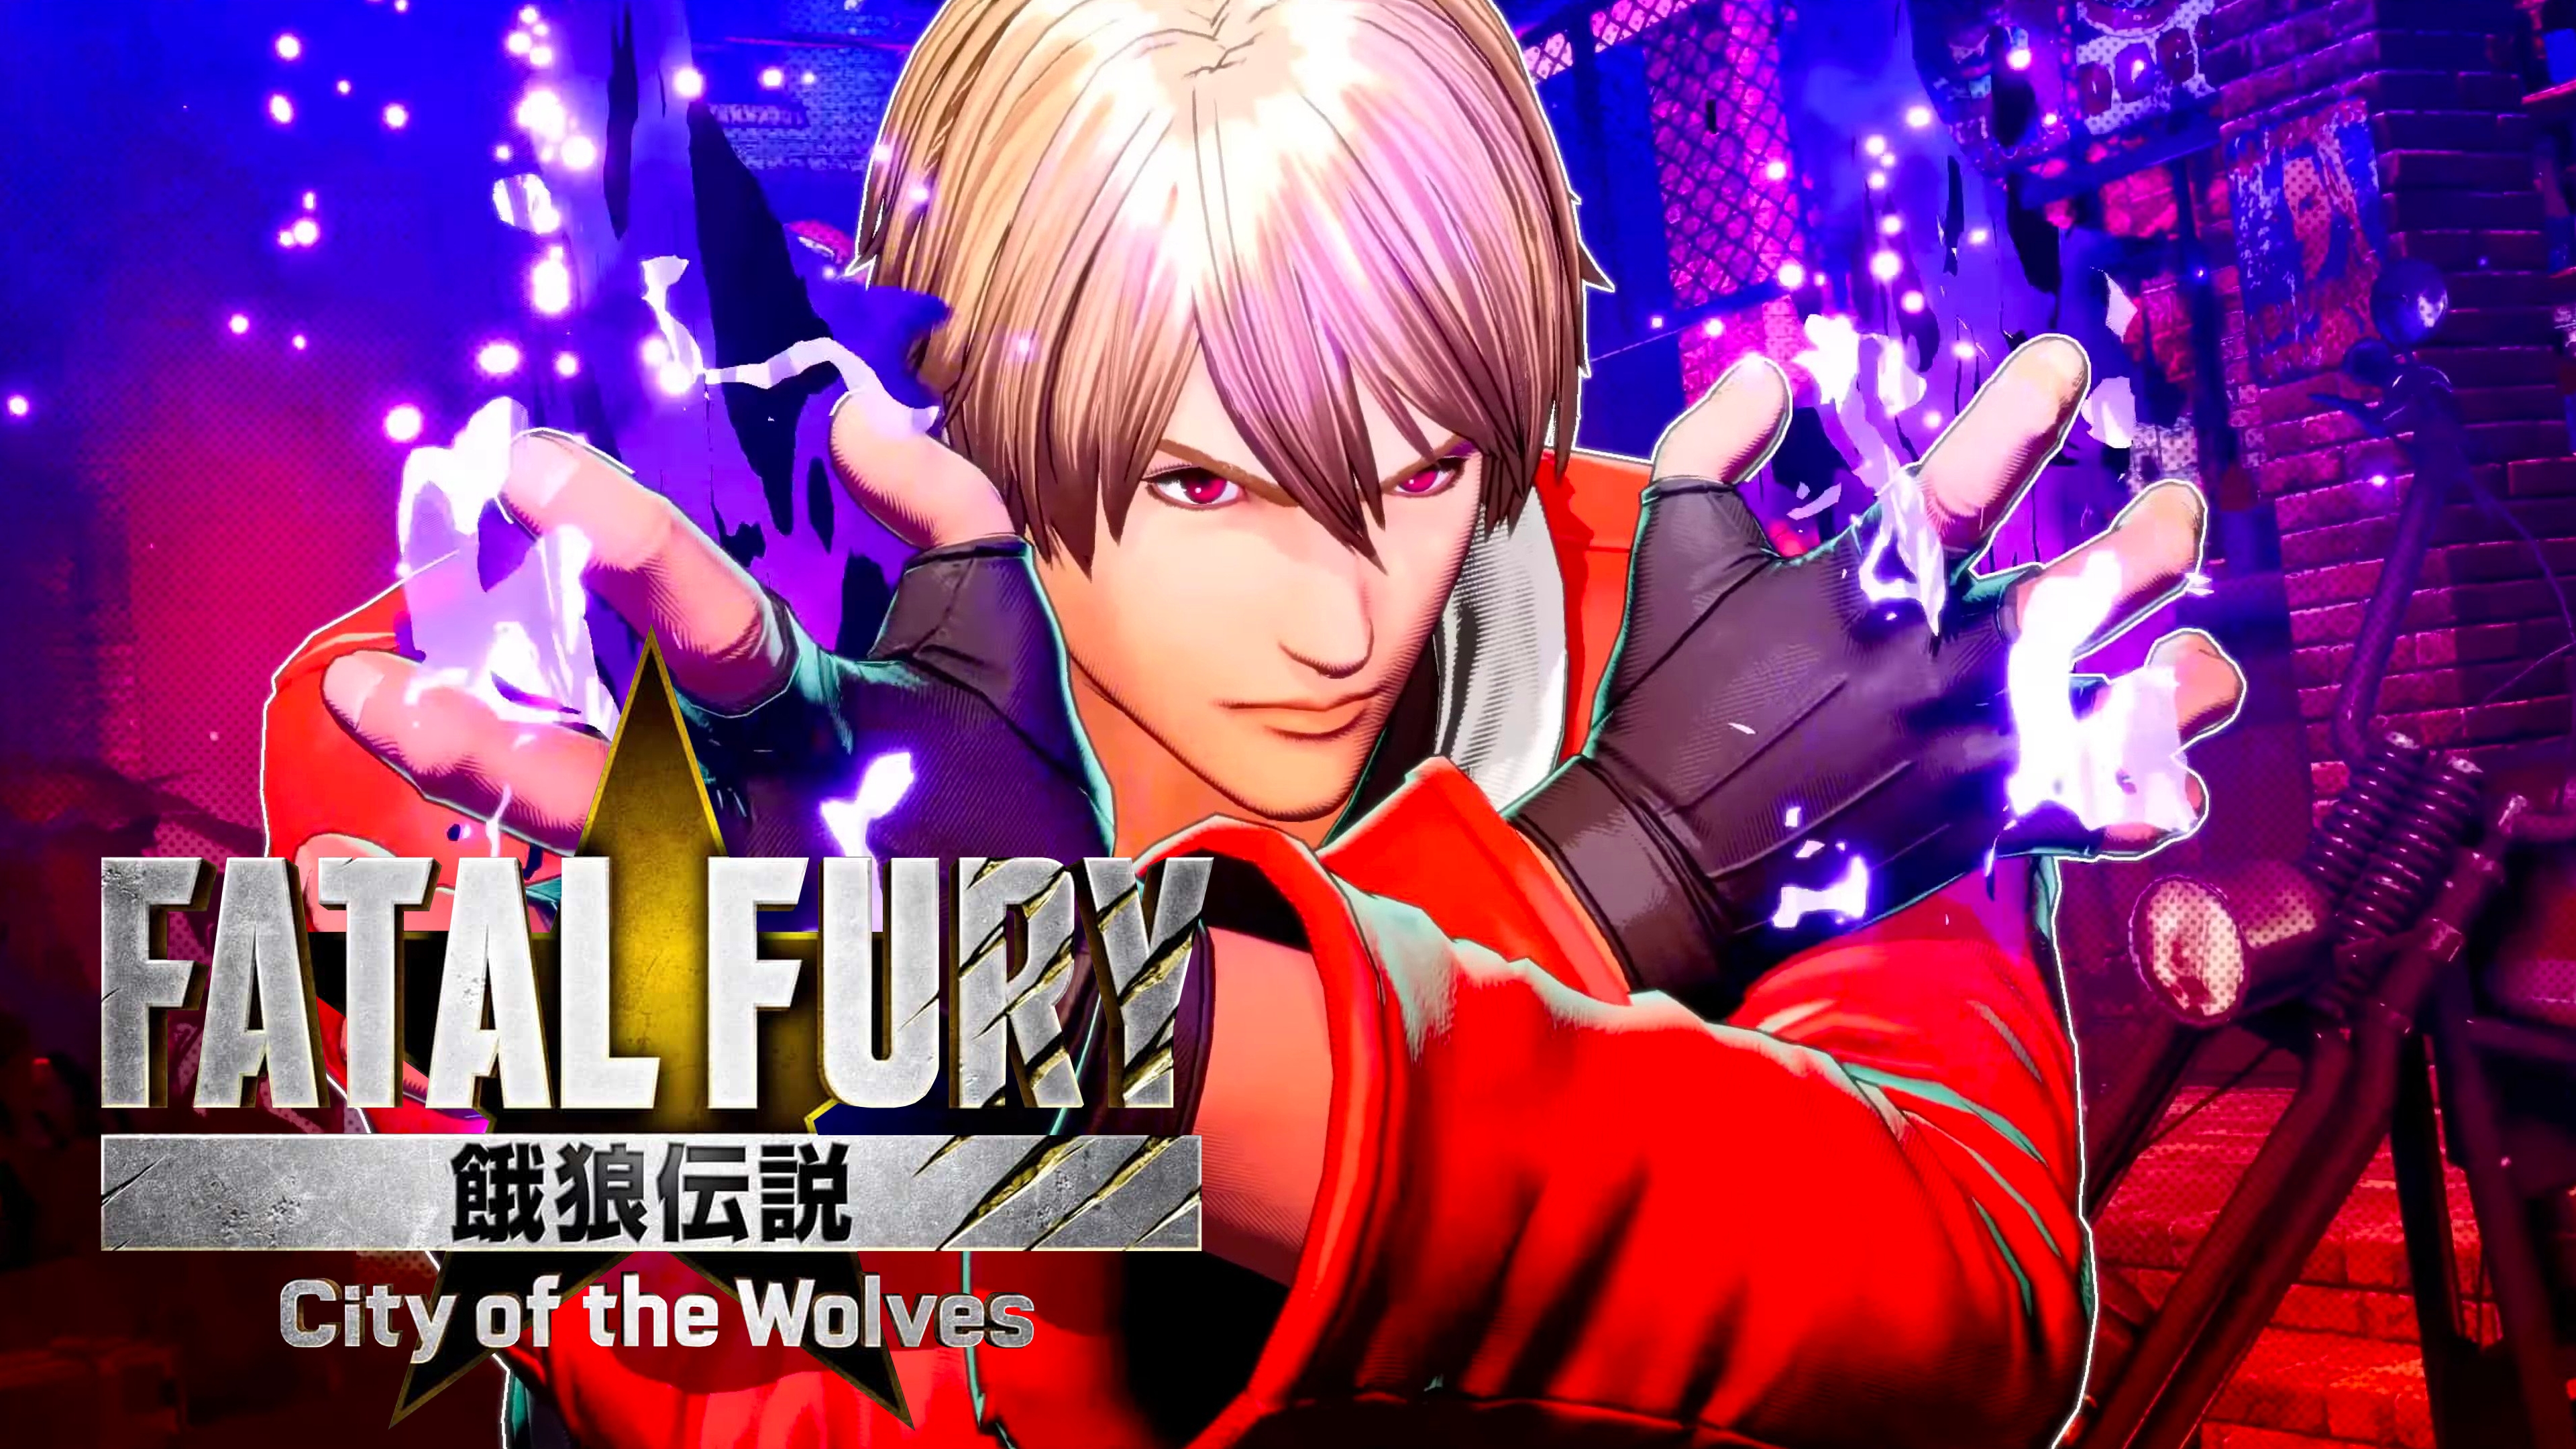 FATAL FURY - City of the Wolves (All characters so far?) 